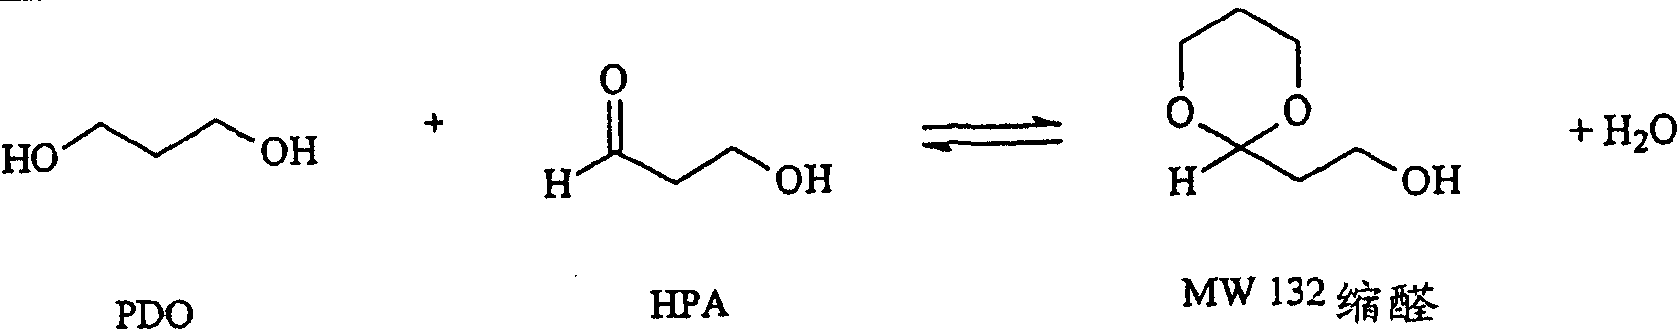 Removal of impurities formed during the production of 1,3-propanediol